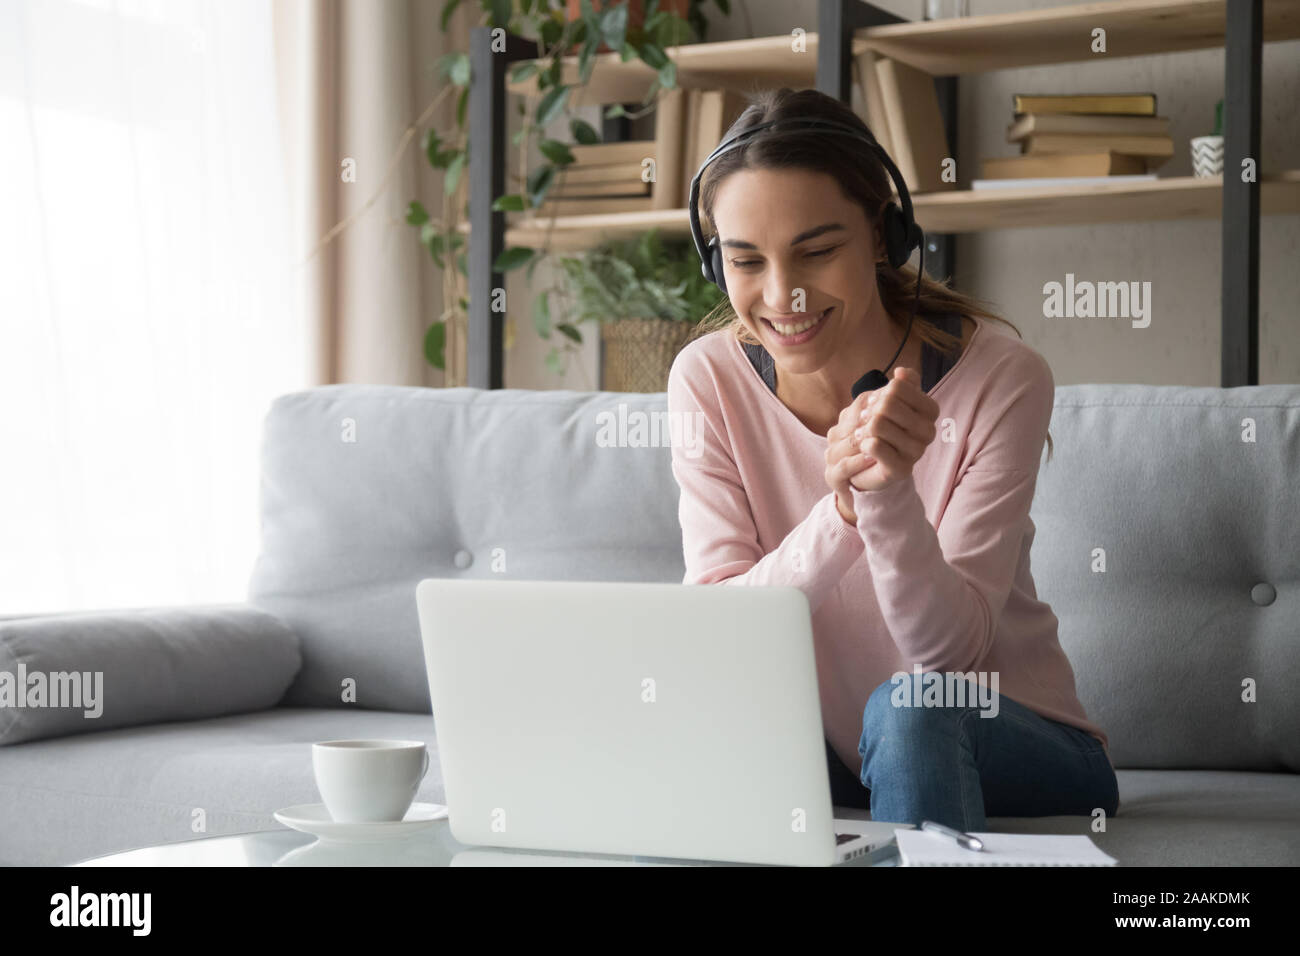 Smiling woman watching webinar sitting on couch at home Stock Photo